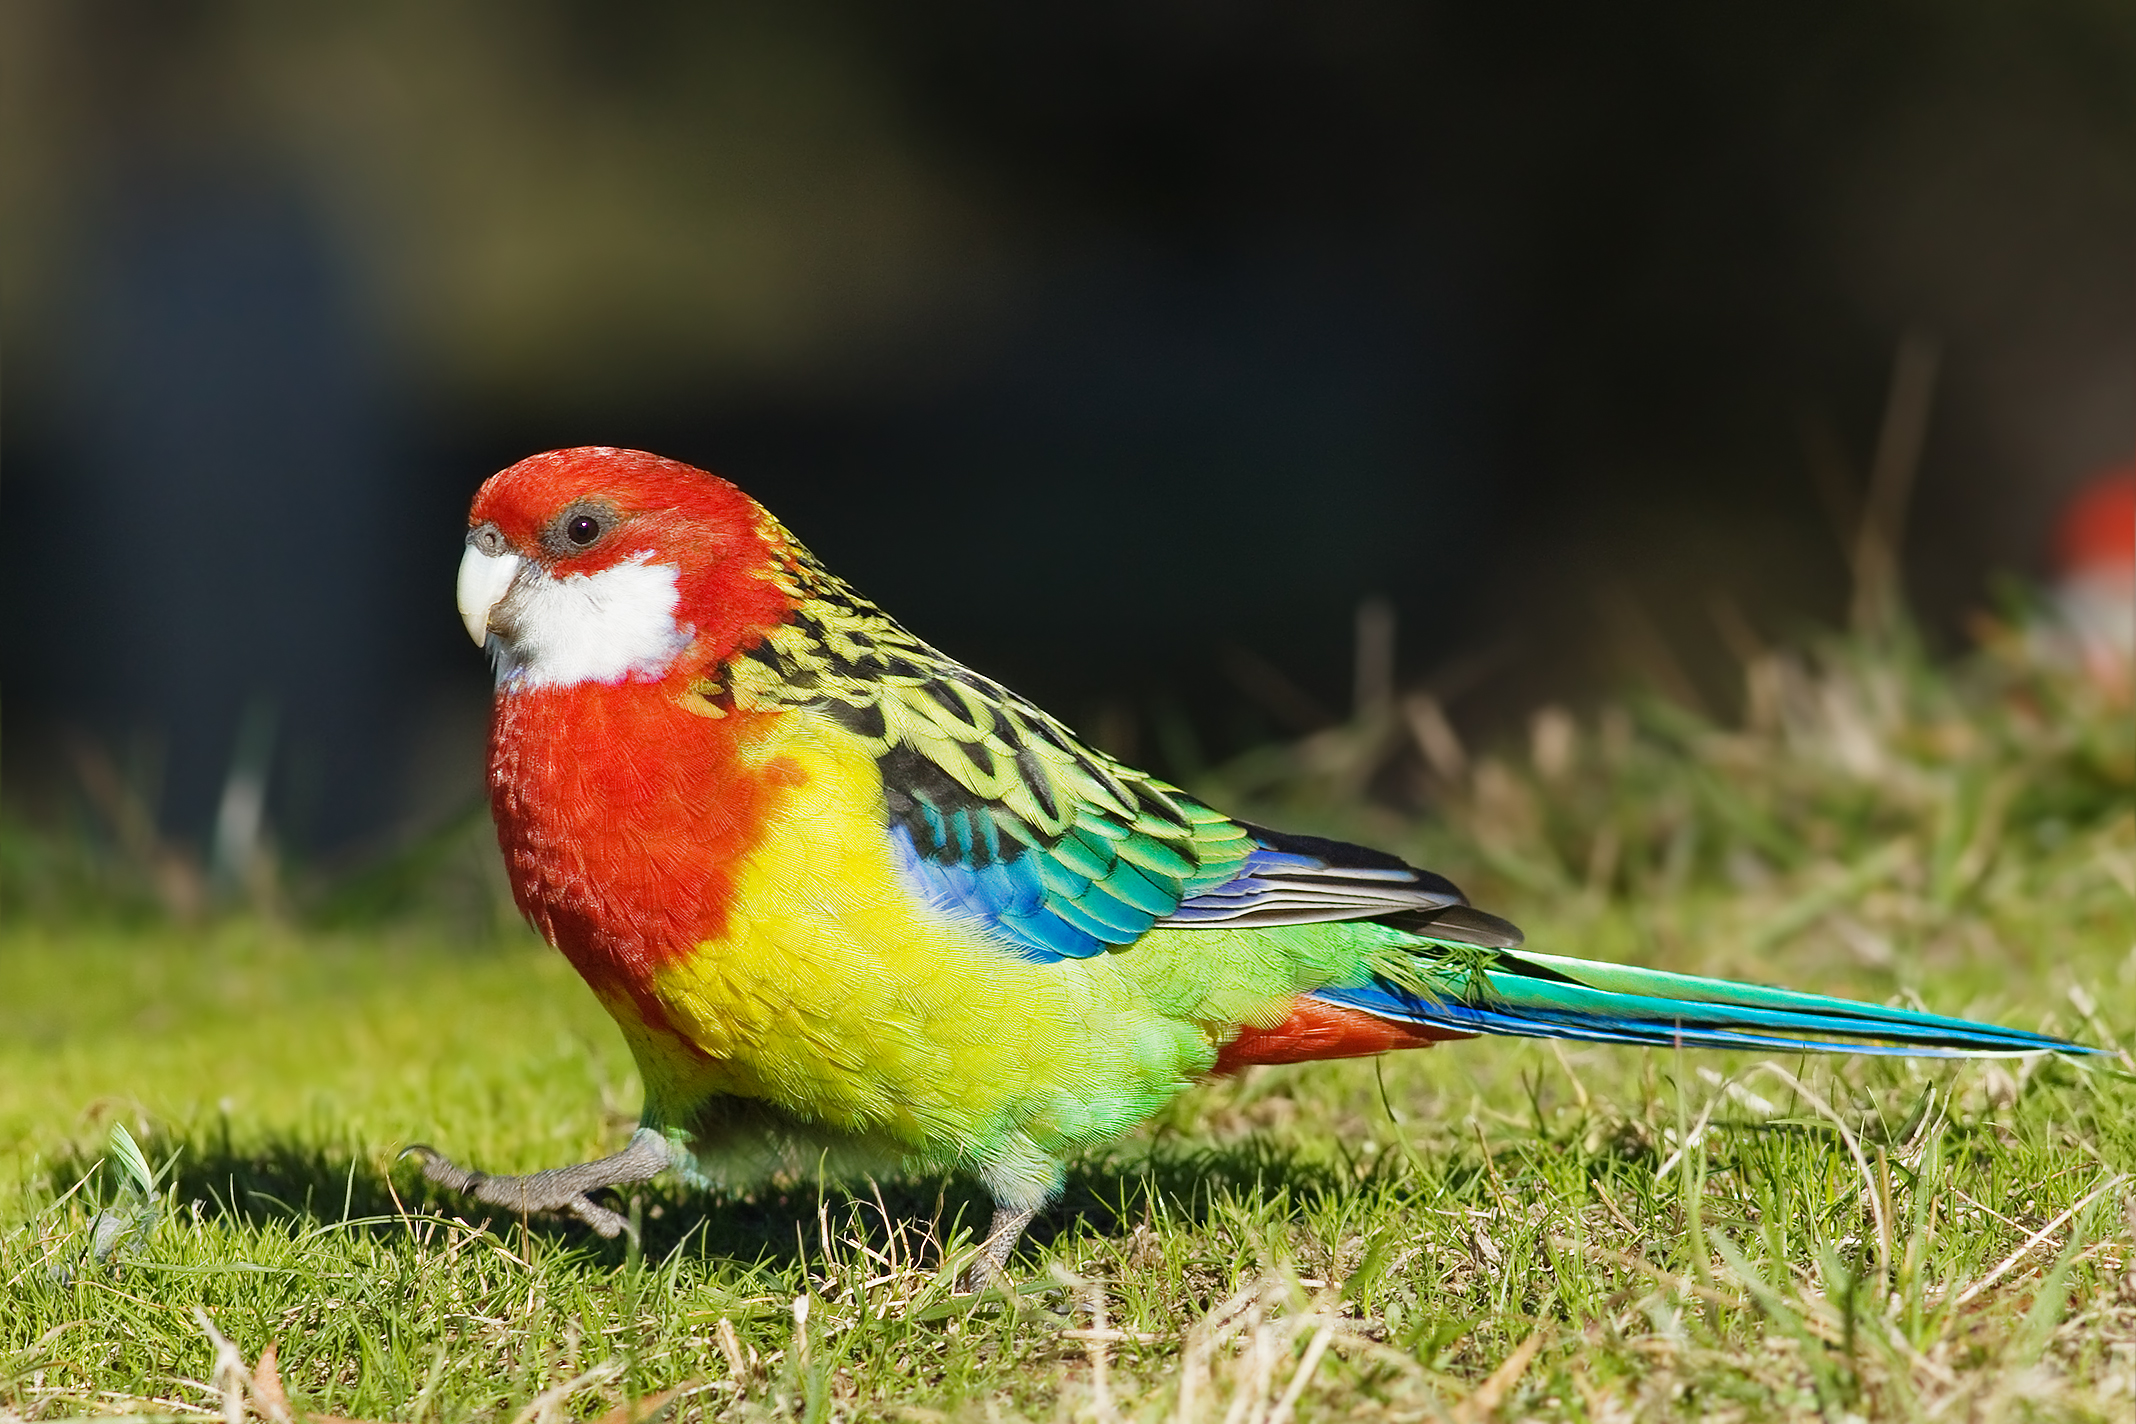 Rosella Backgrounds, Compatible - PC, Mobile, Gadgets| 2136x1424 px